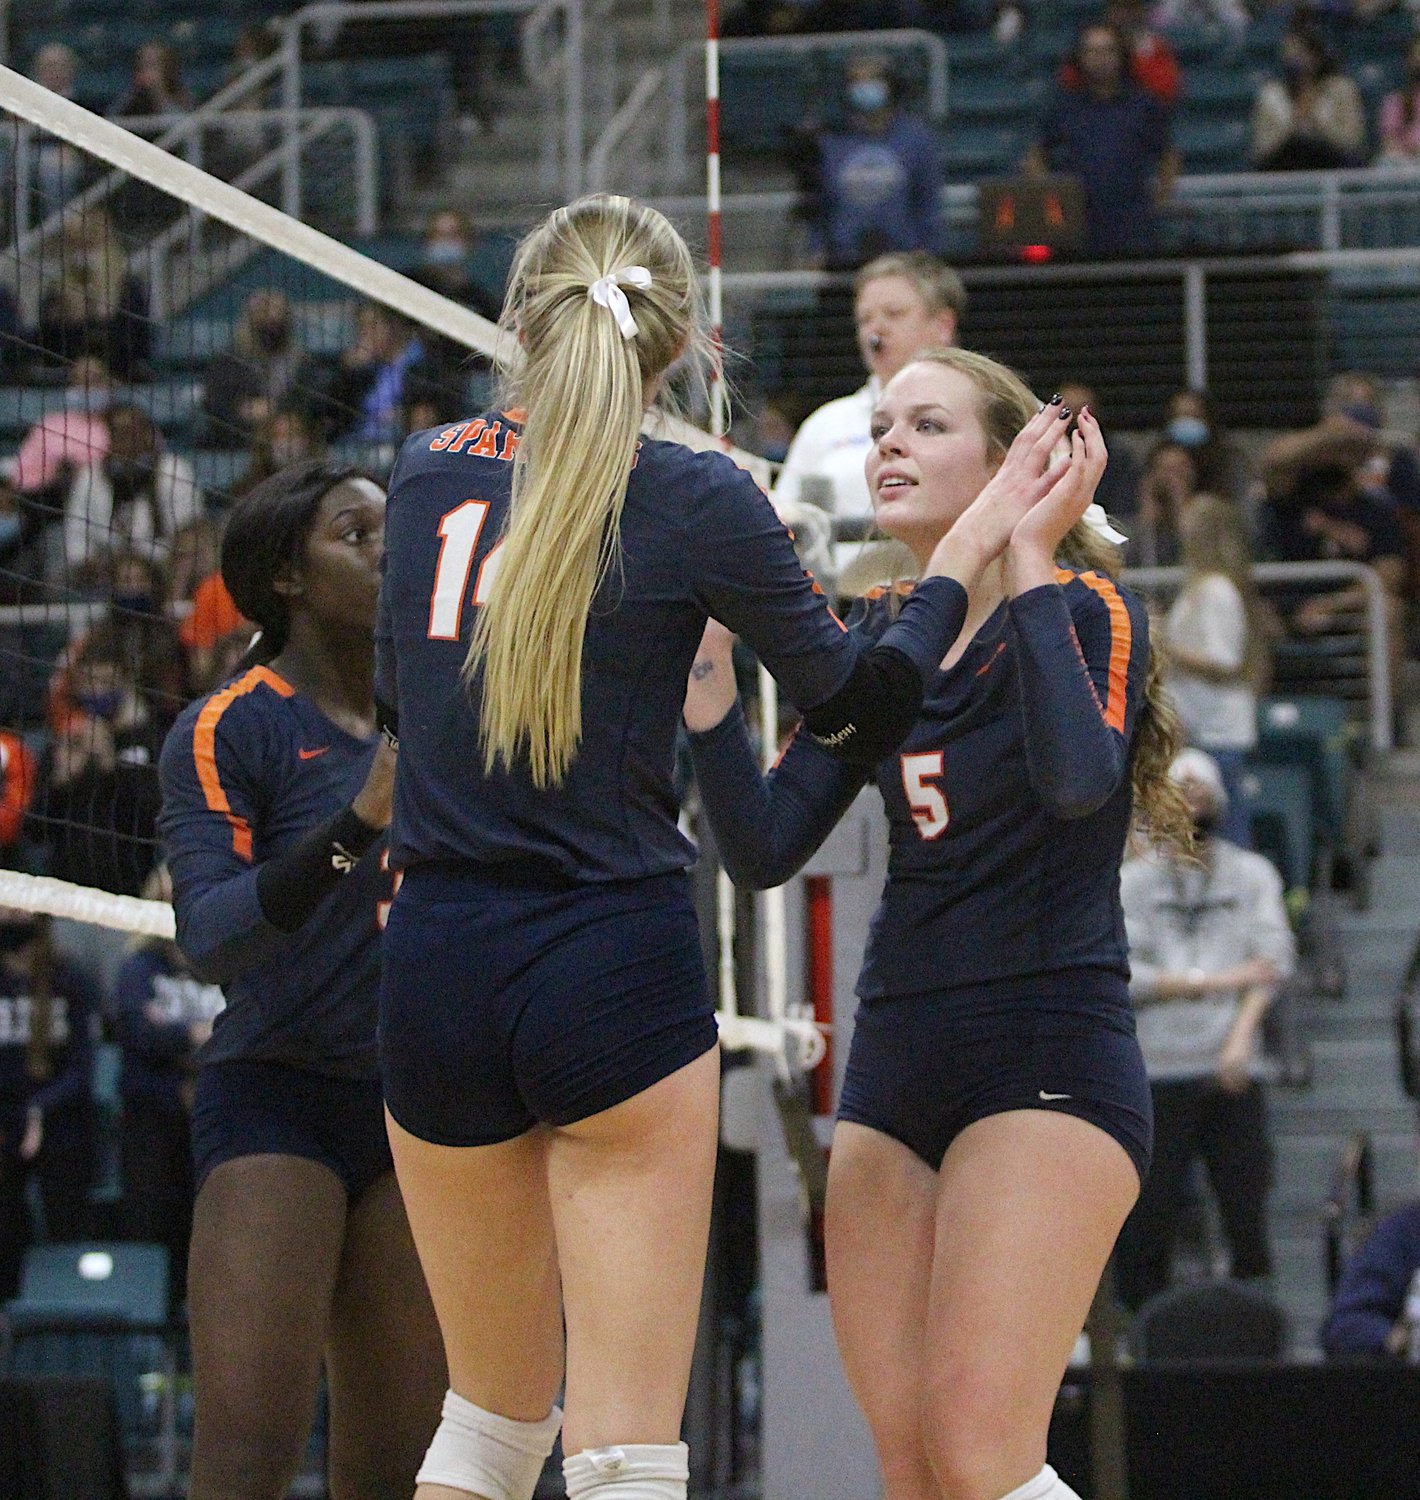 Seven Lakes senior Ally Batenhorst (front) and junior Casey Batenhorst (right) are enjoying the Spartans’ remarkable run to the Class 6A state volleyball final. Ally is returning to the state final after making it with her older sister, Dani, in 2017. Now with younger sister Casey, she’s hoping the second time can bring home a state title.